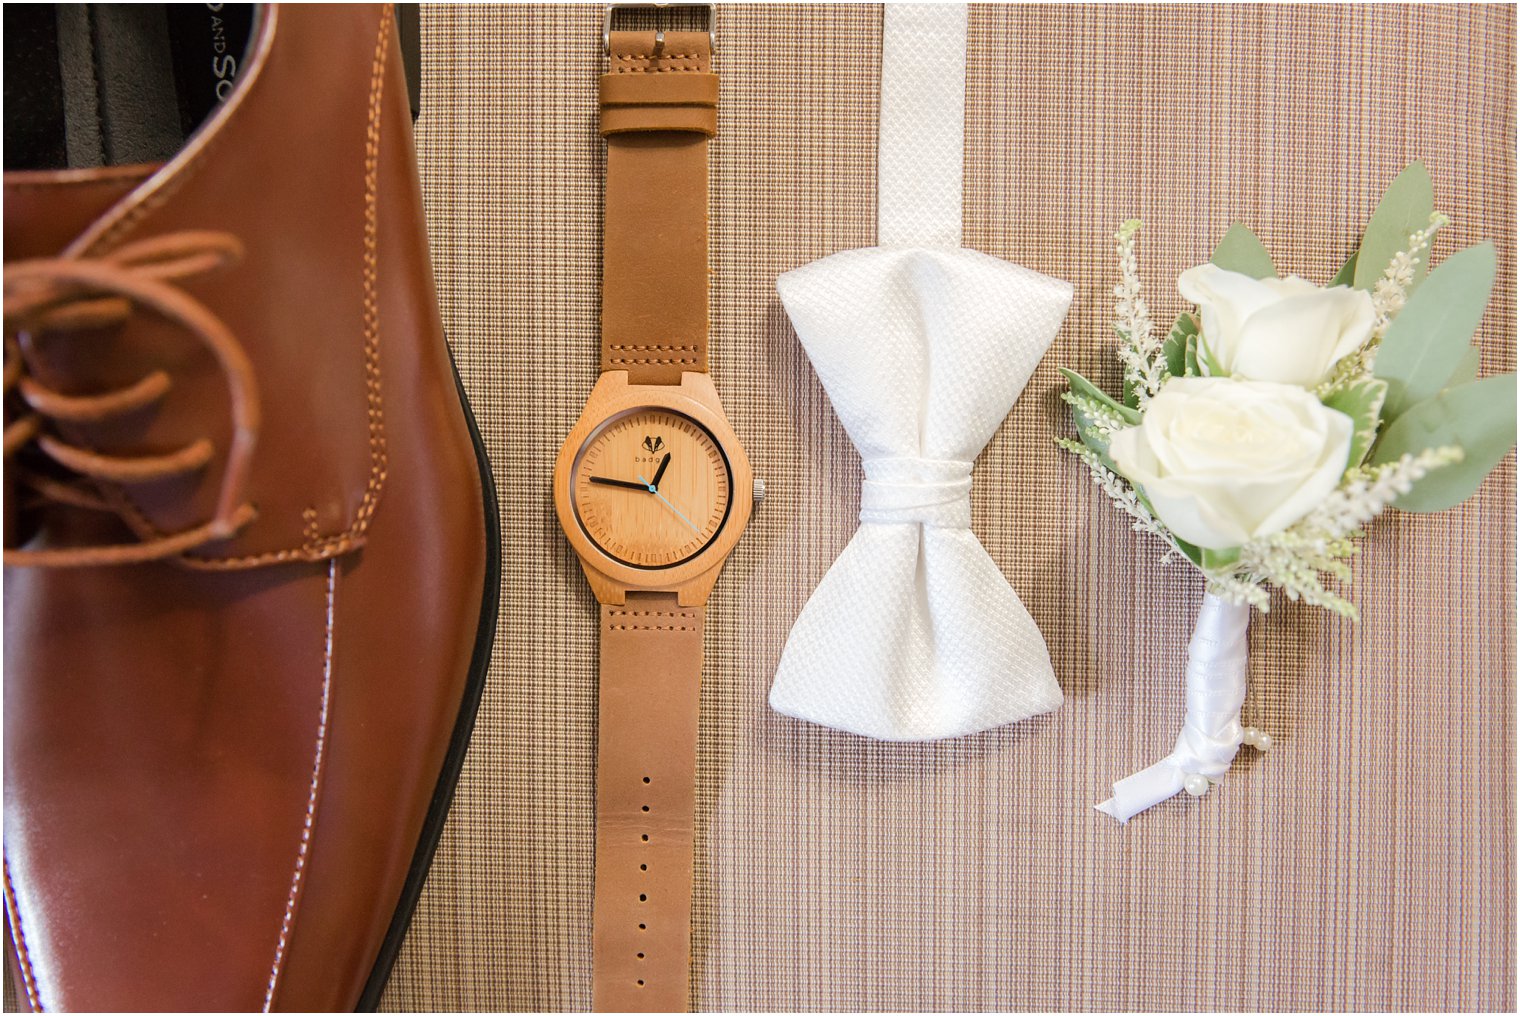 groom's tie, shoes, and watch for Park Savoy Estate wedding day